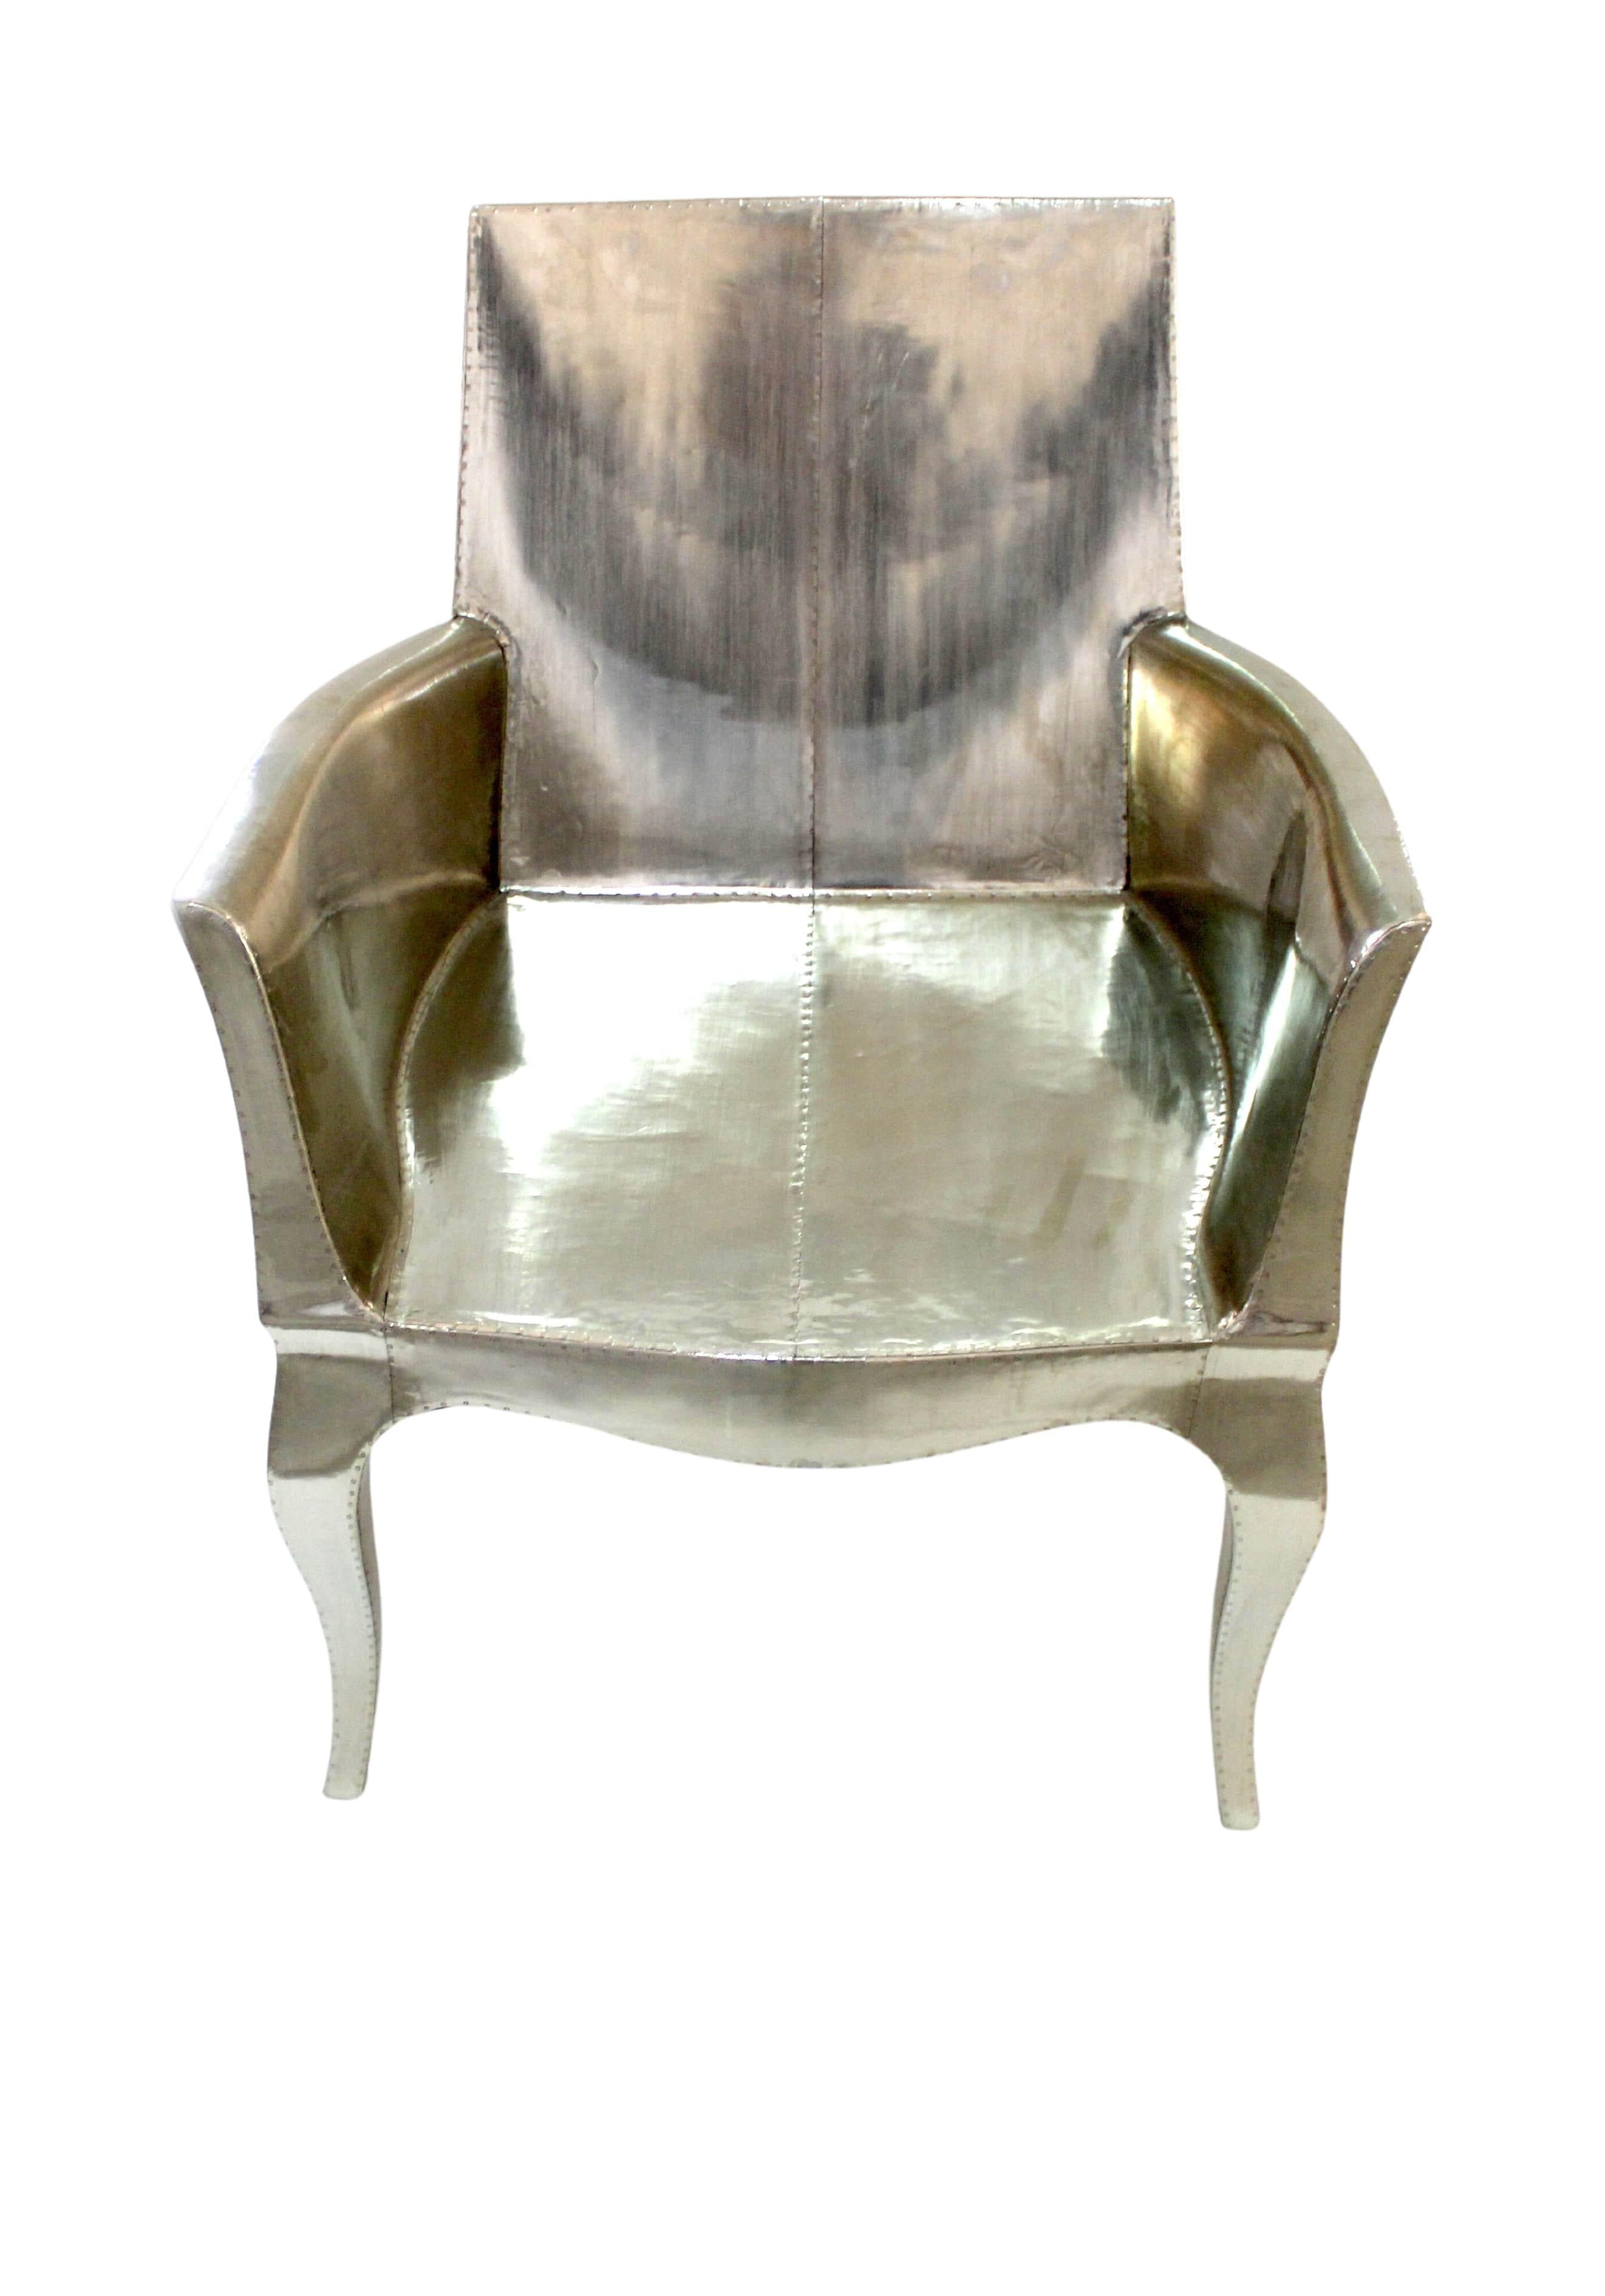 Indian Art Deco Club Chairs Pair Designed by Paul Mathieu for Stephanie Odegard For Sale